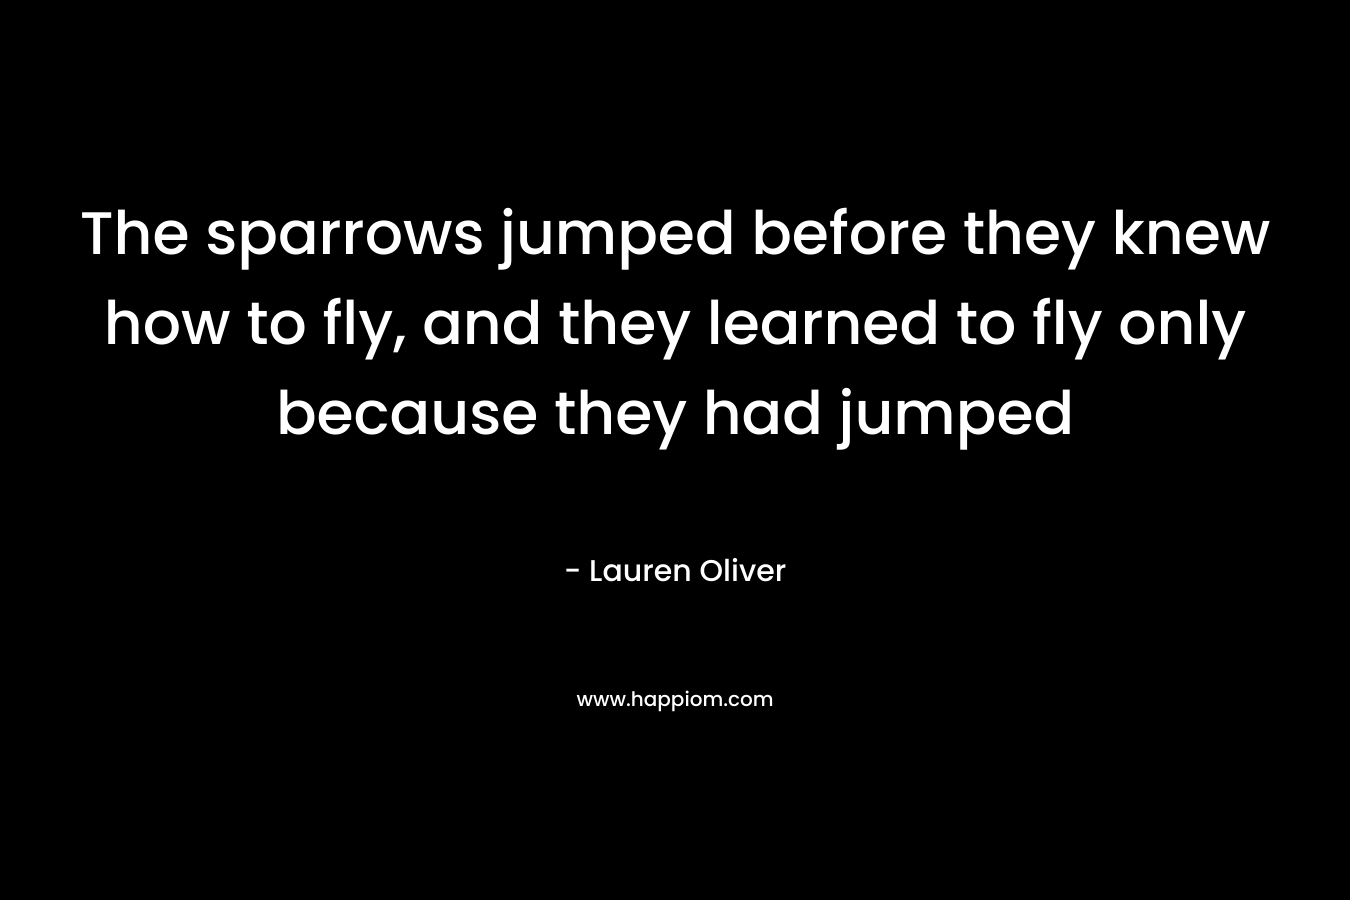 The sparrows jumped before they knew how to fly, and they learned to fly only because they had jumped